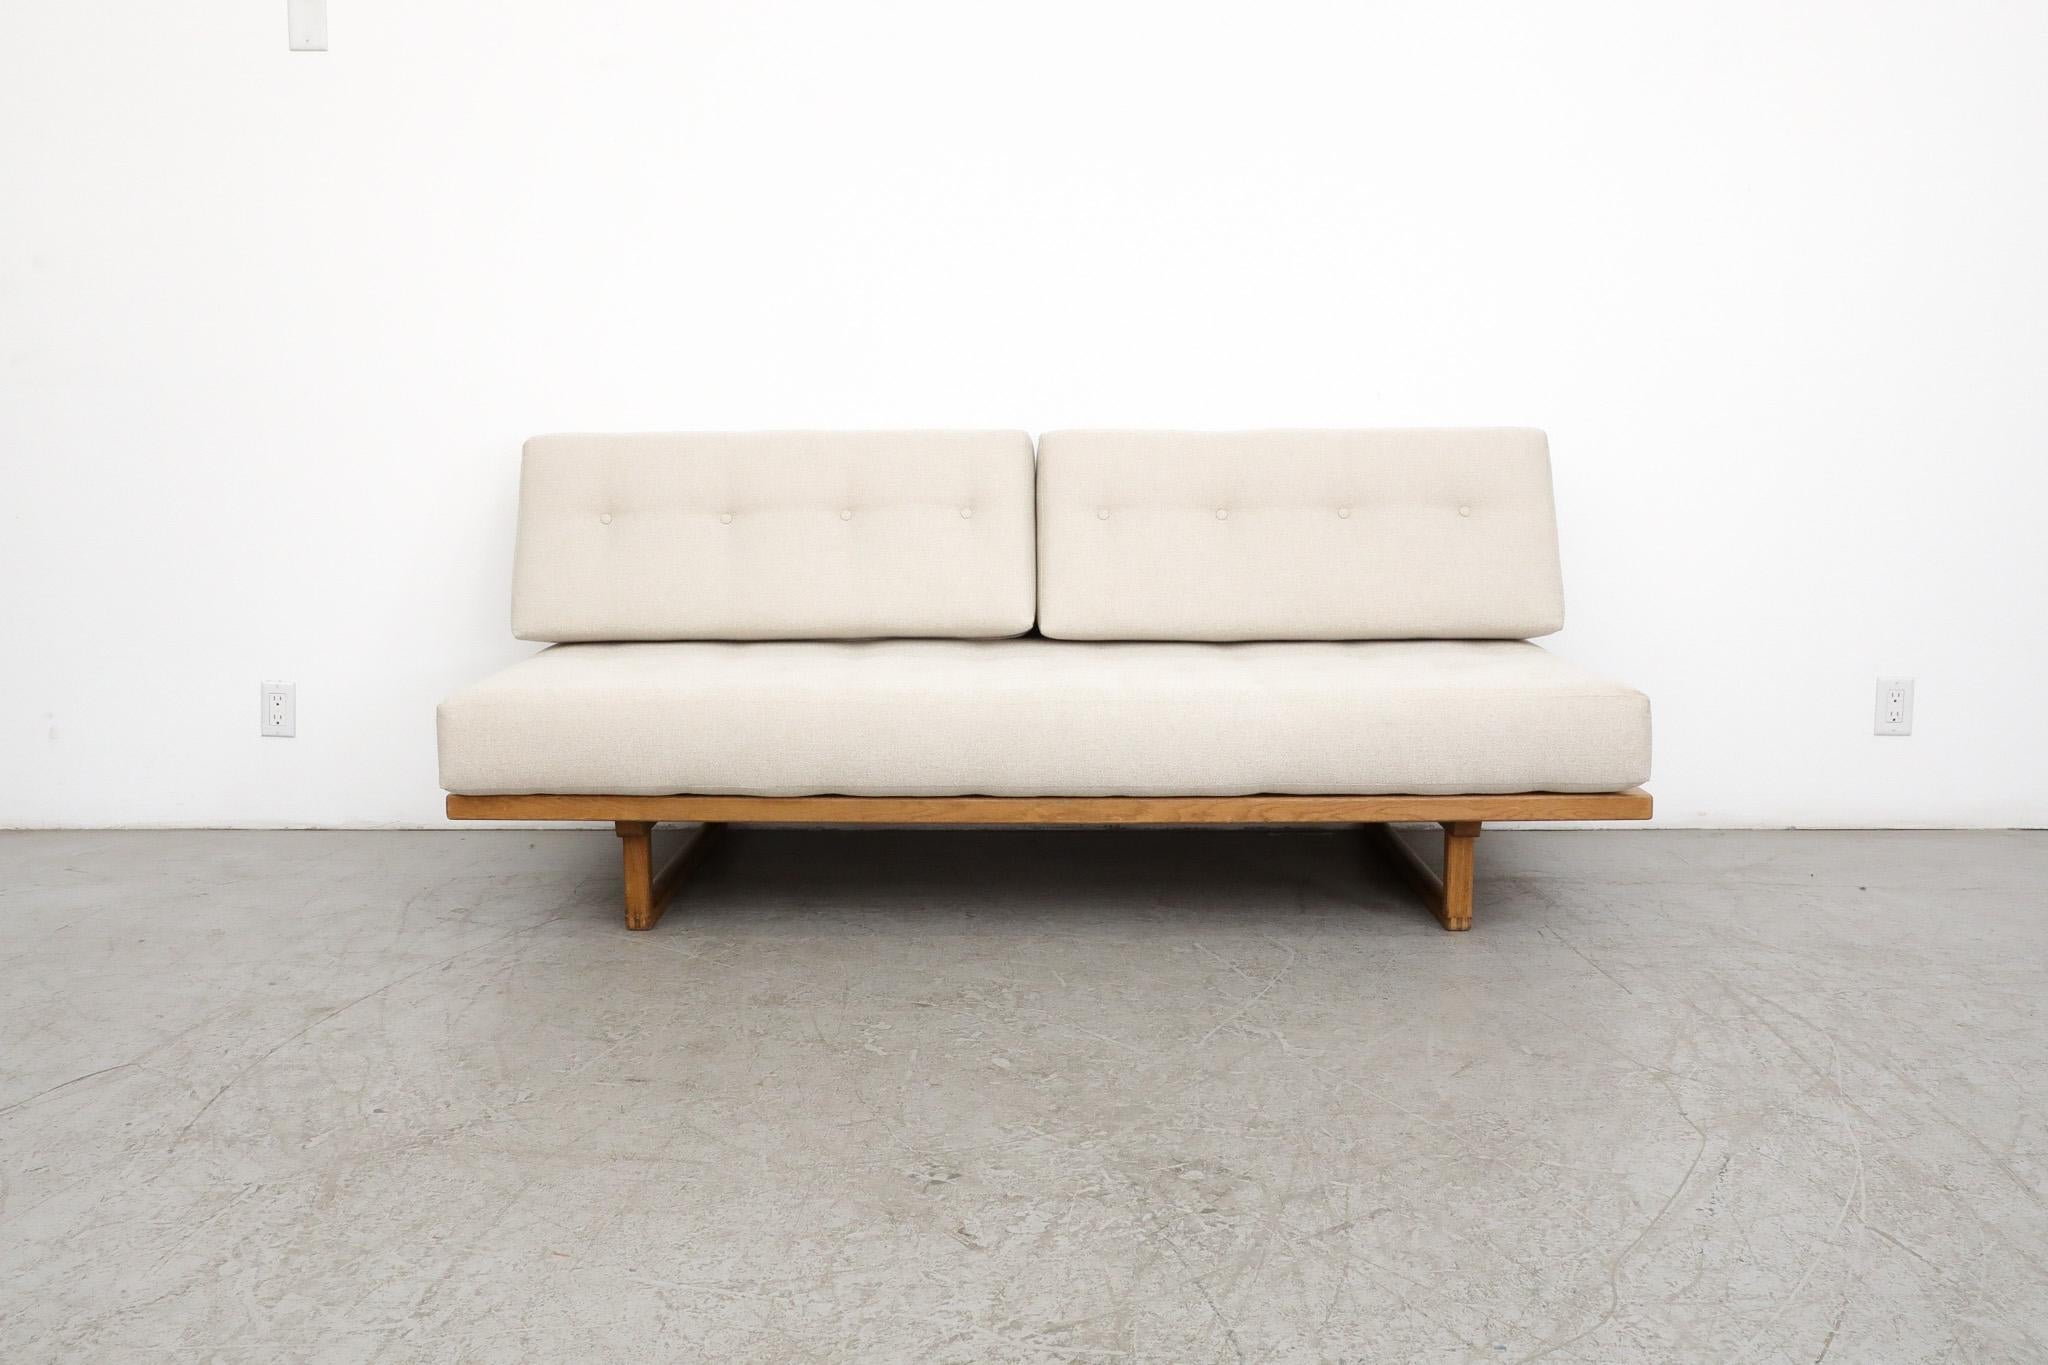 'Model 4312' loveseat or daybed designed by Børge Mogensen for Fredericia Stolefabrik. 
Børge Mogensen, 1914-1972,  was a Danish furniture architect. After an apprenticeship as a cabinetmaker, Mogensen was educated in 1936-42 at the School of Crafts